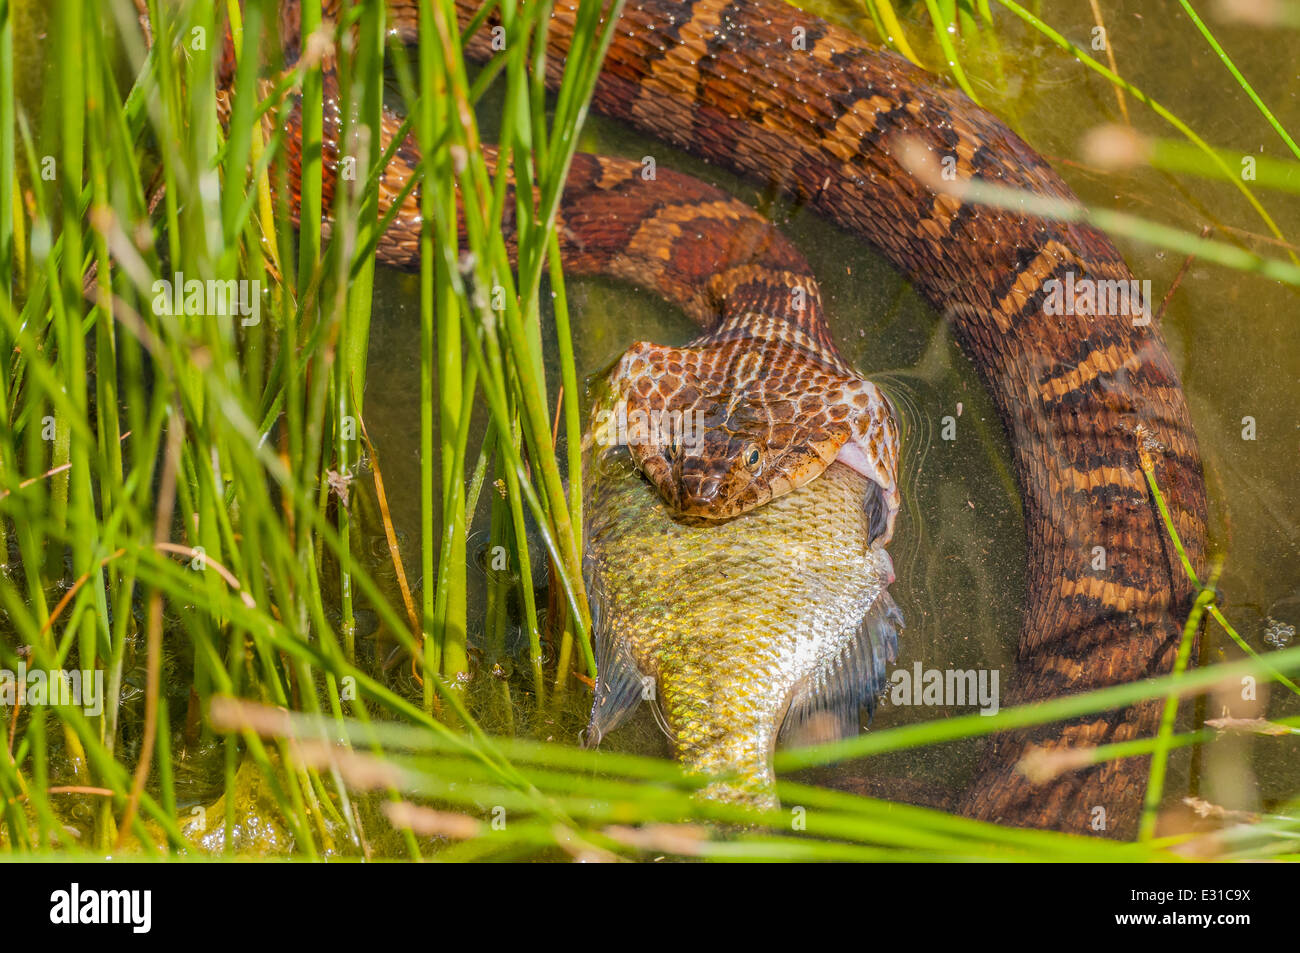 A Water Snake Eating Prey at the edge of a pond. Stock Photo